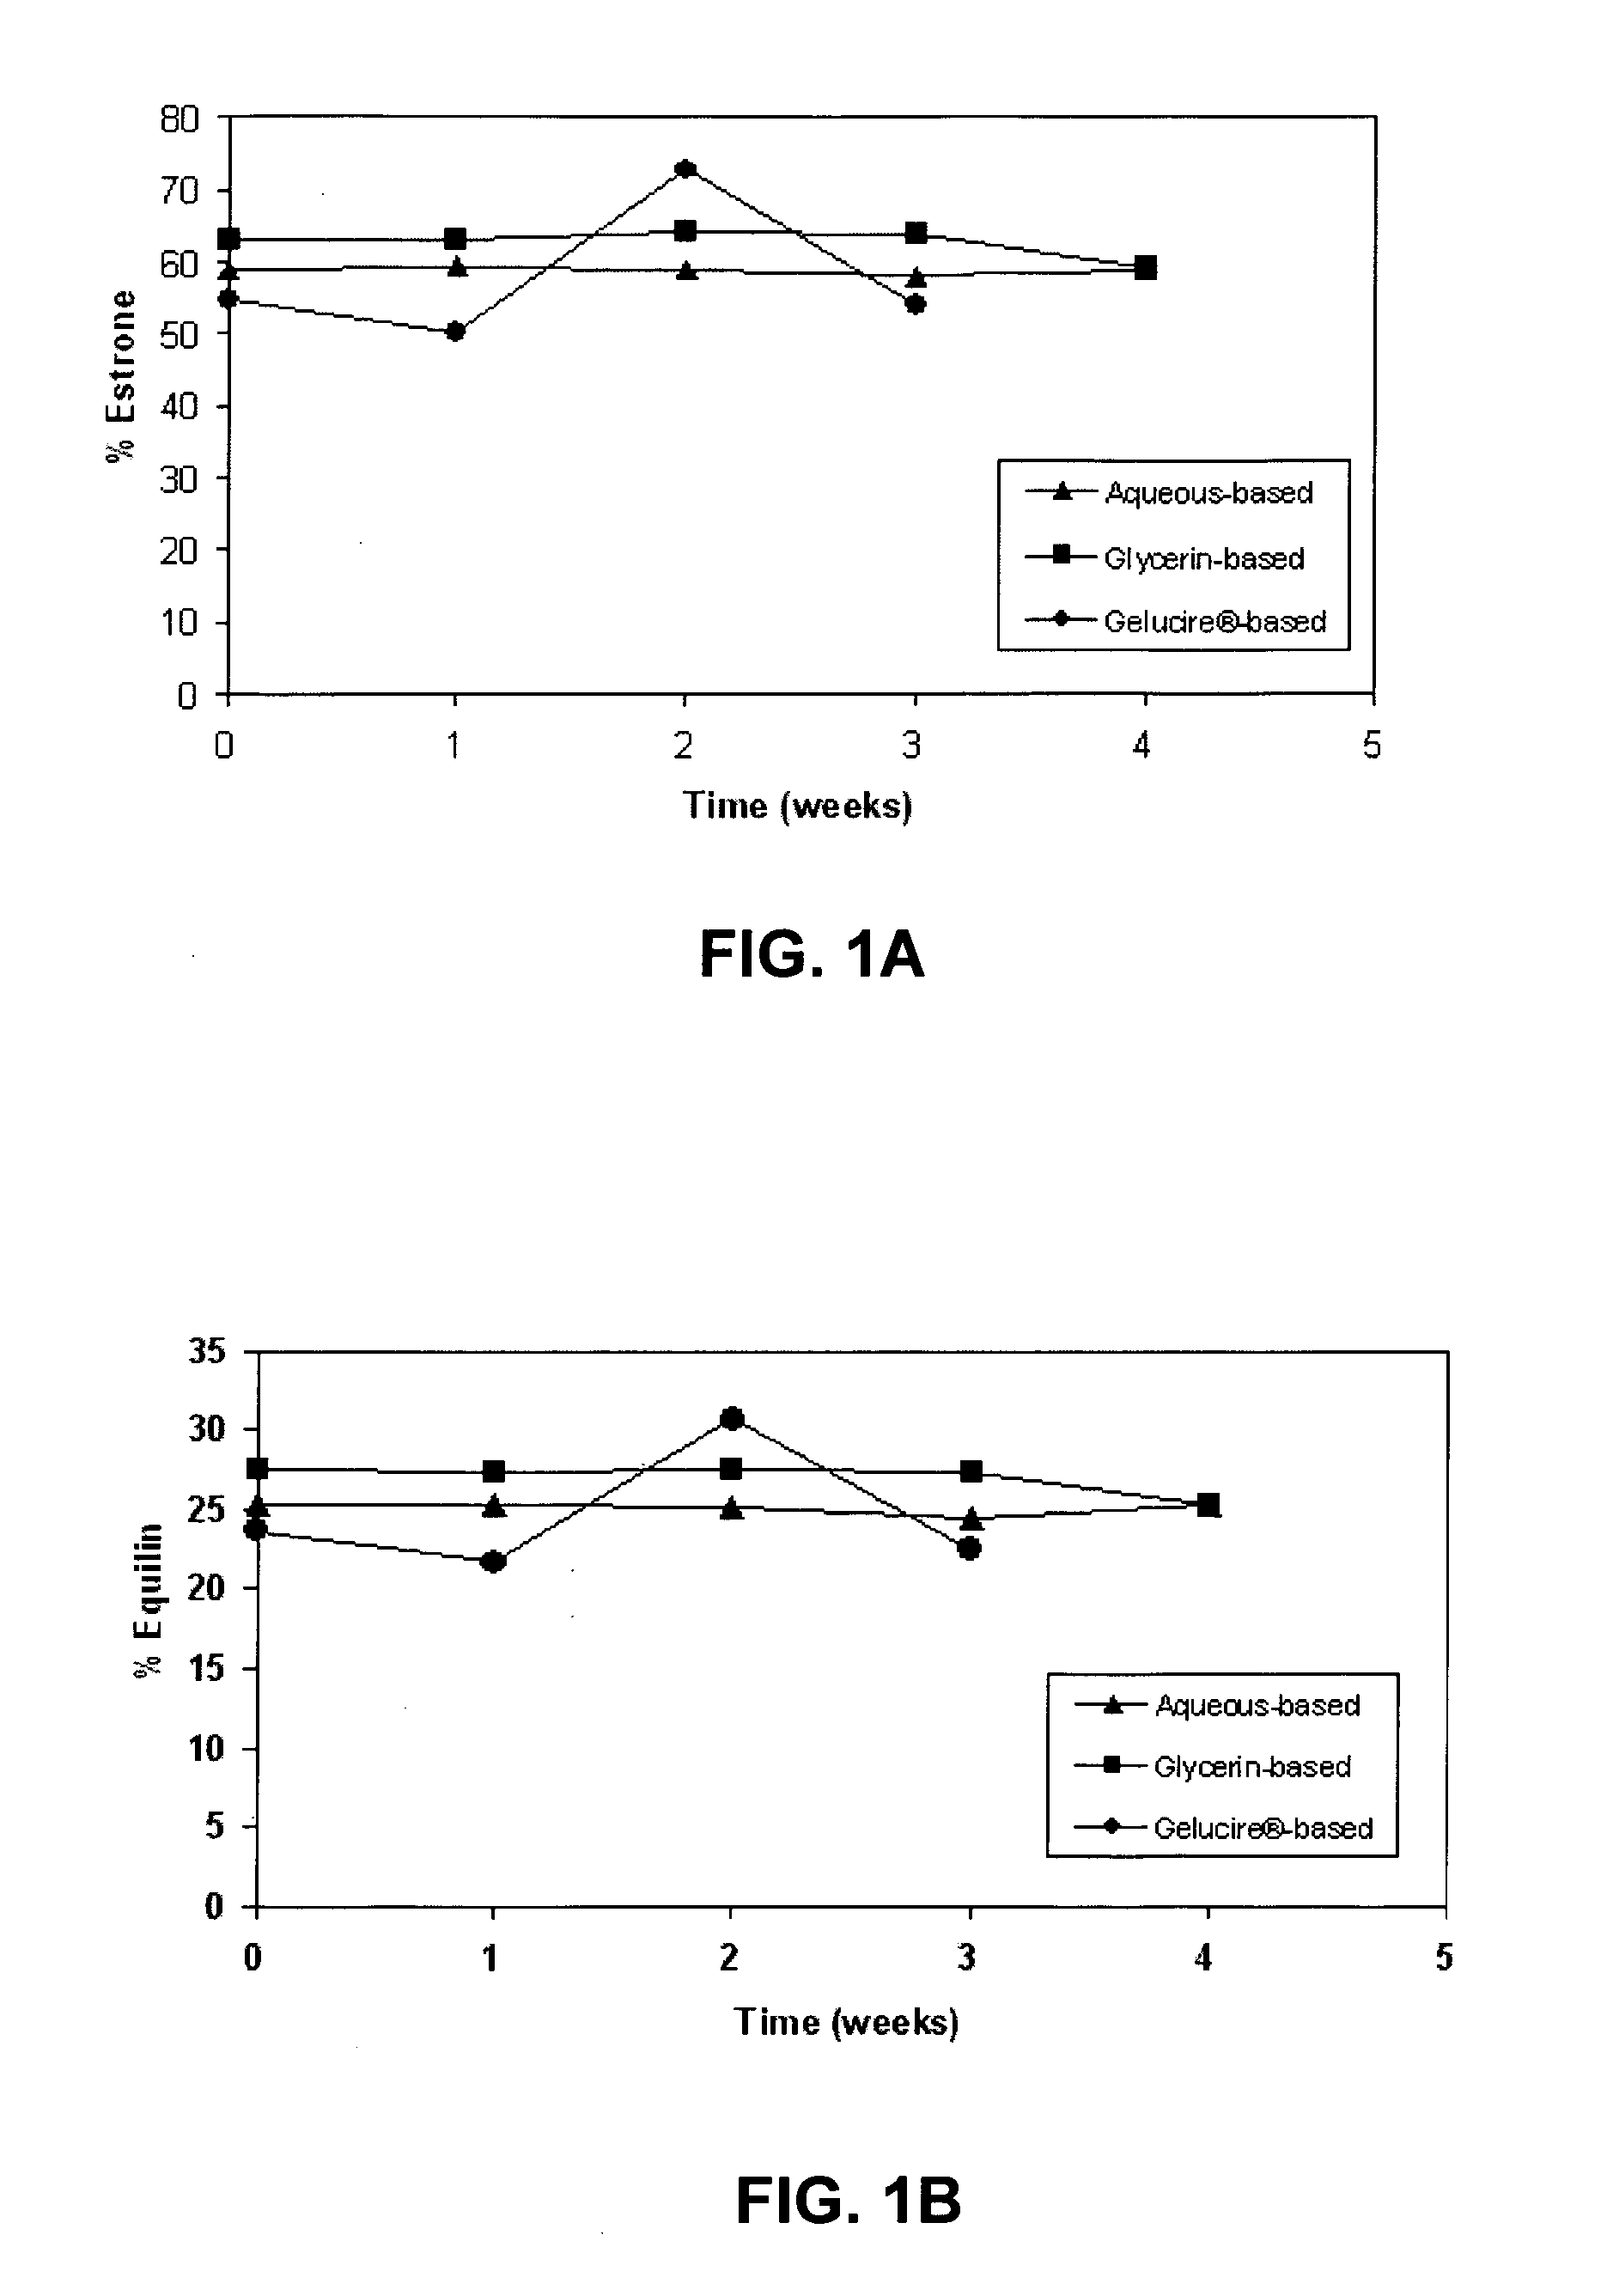 Conjugated estrogen compositions, applicators, kits, and methods of making and use thereof